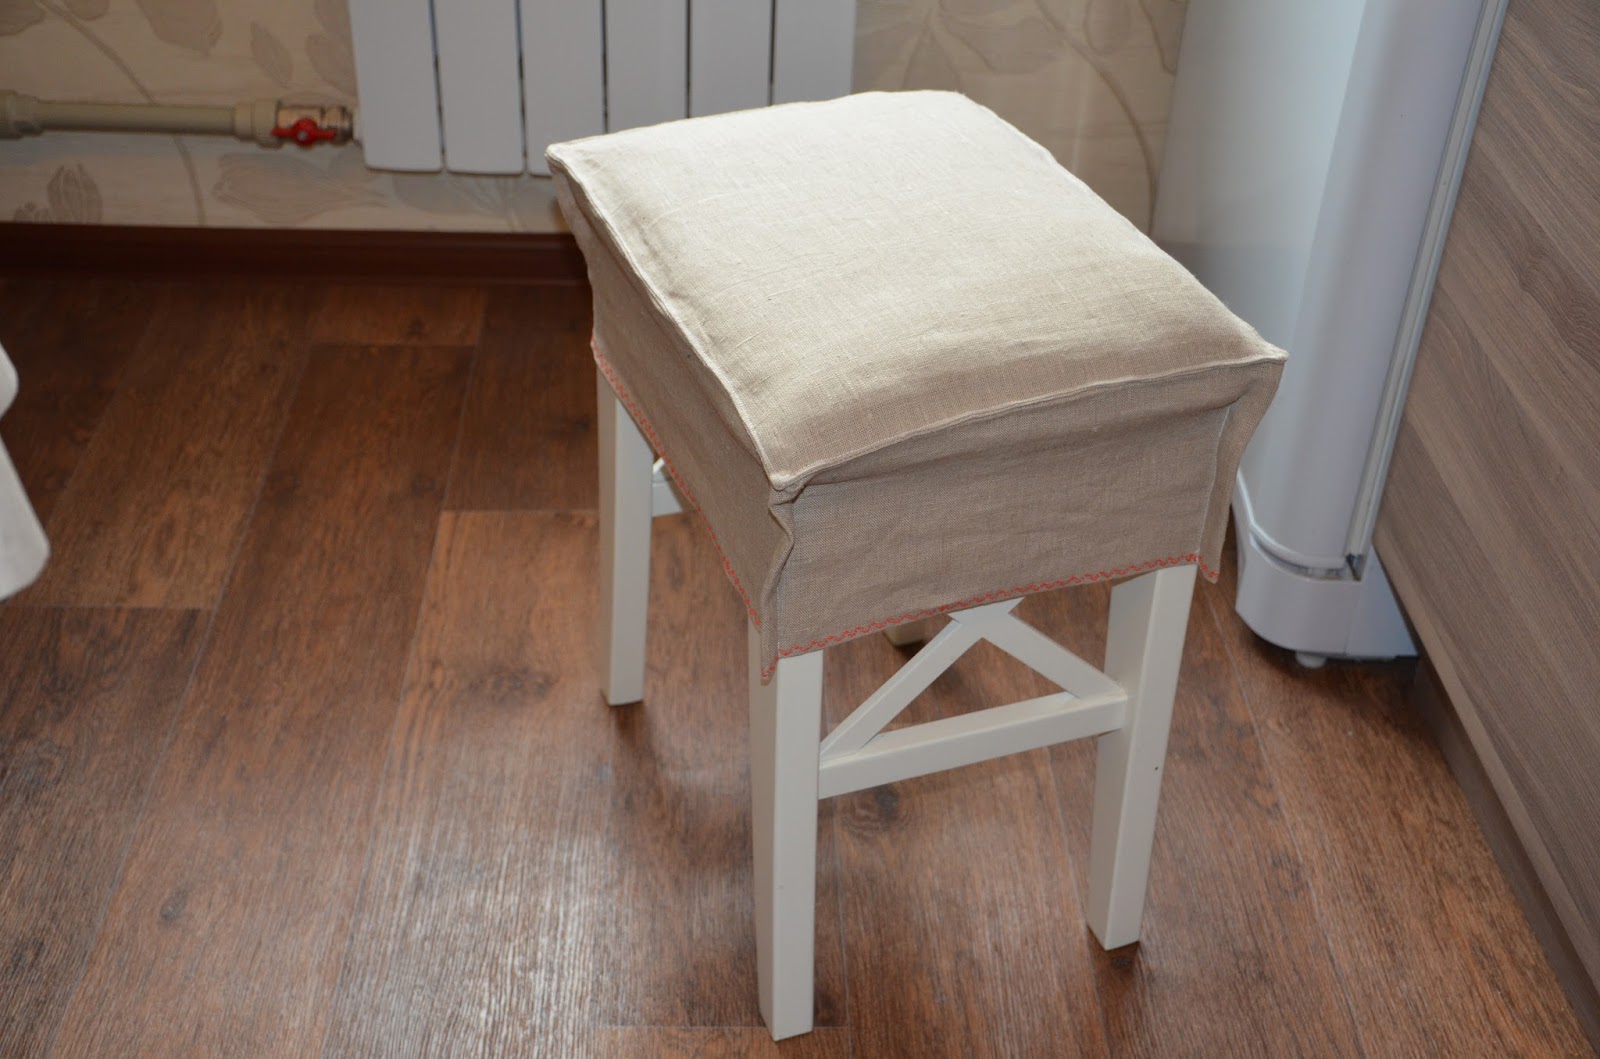 stool with cover